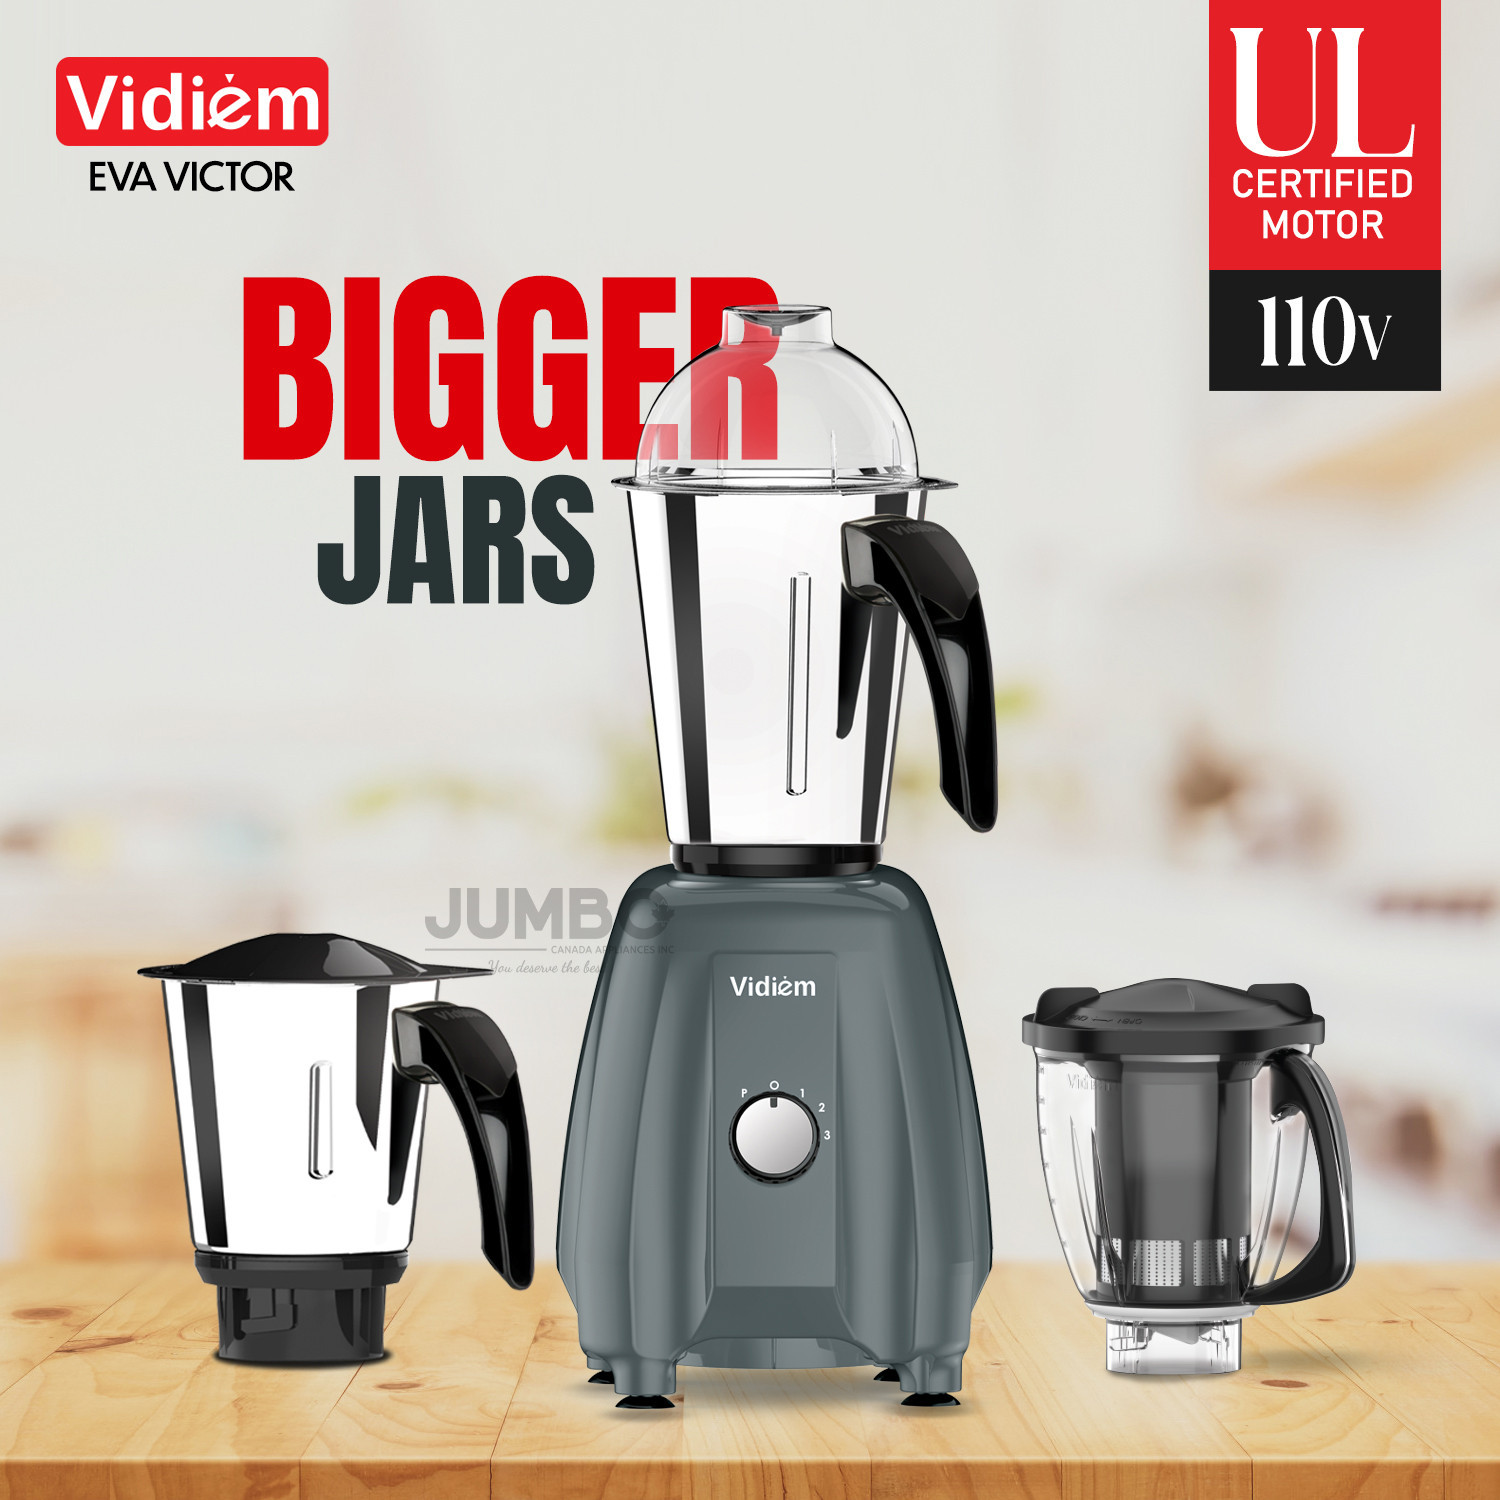 vidiem-eva-victor-650w-110v-stainless-steel-jars-indian-mixer-grinder-spice-coffee-grinder-for-use-in-canada-usa2